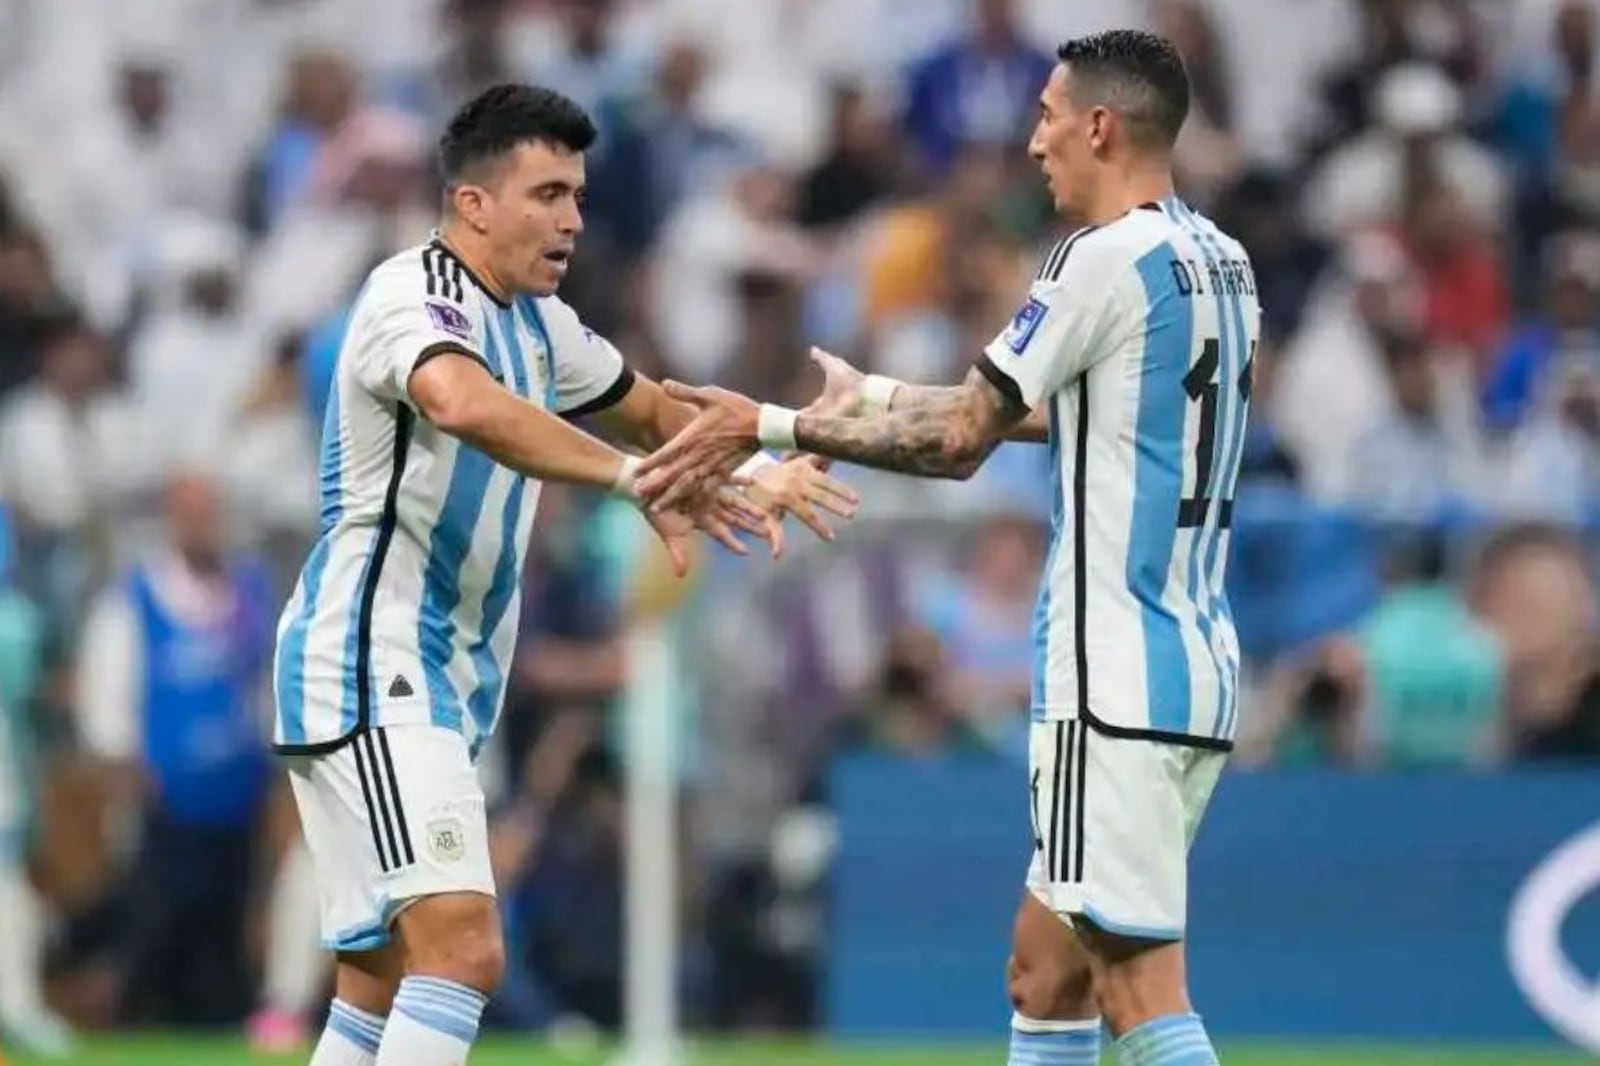 Di María's revelation about his exit in the World Cup final after 10 months